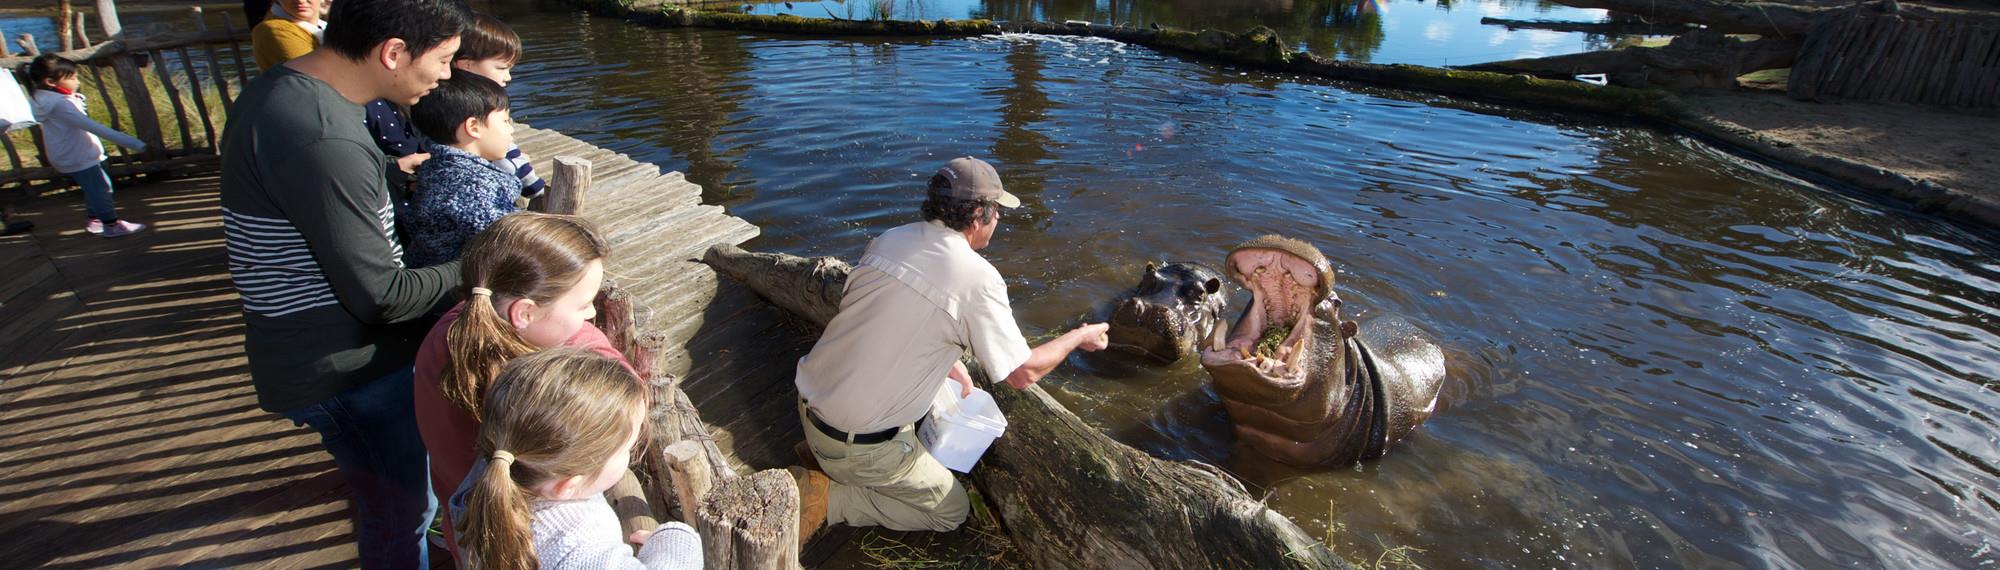 Keeper checking hippos teeth in river